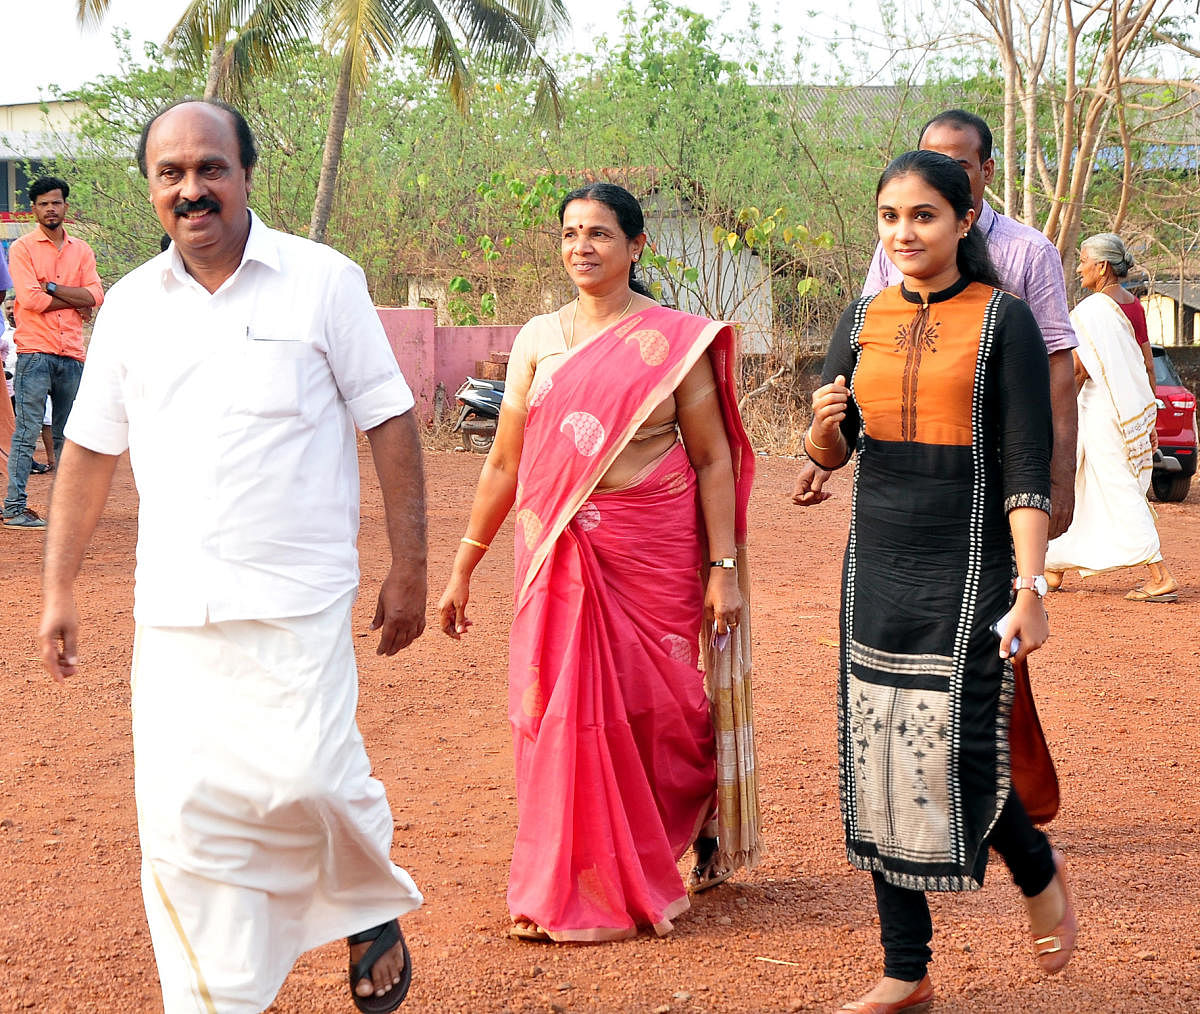 Revenue Minister E Chandrashekaran arrives along with his family members to the polling booth to exercise franchise.